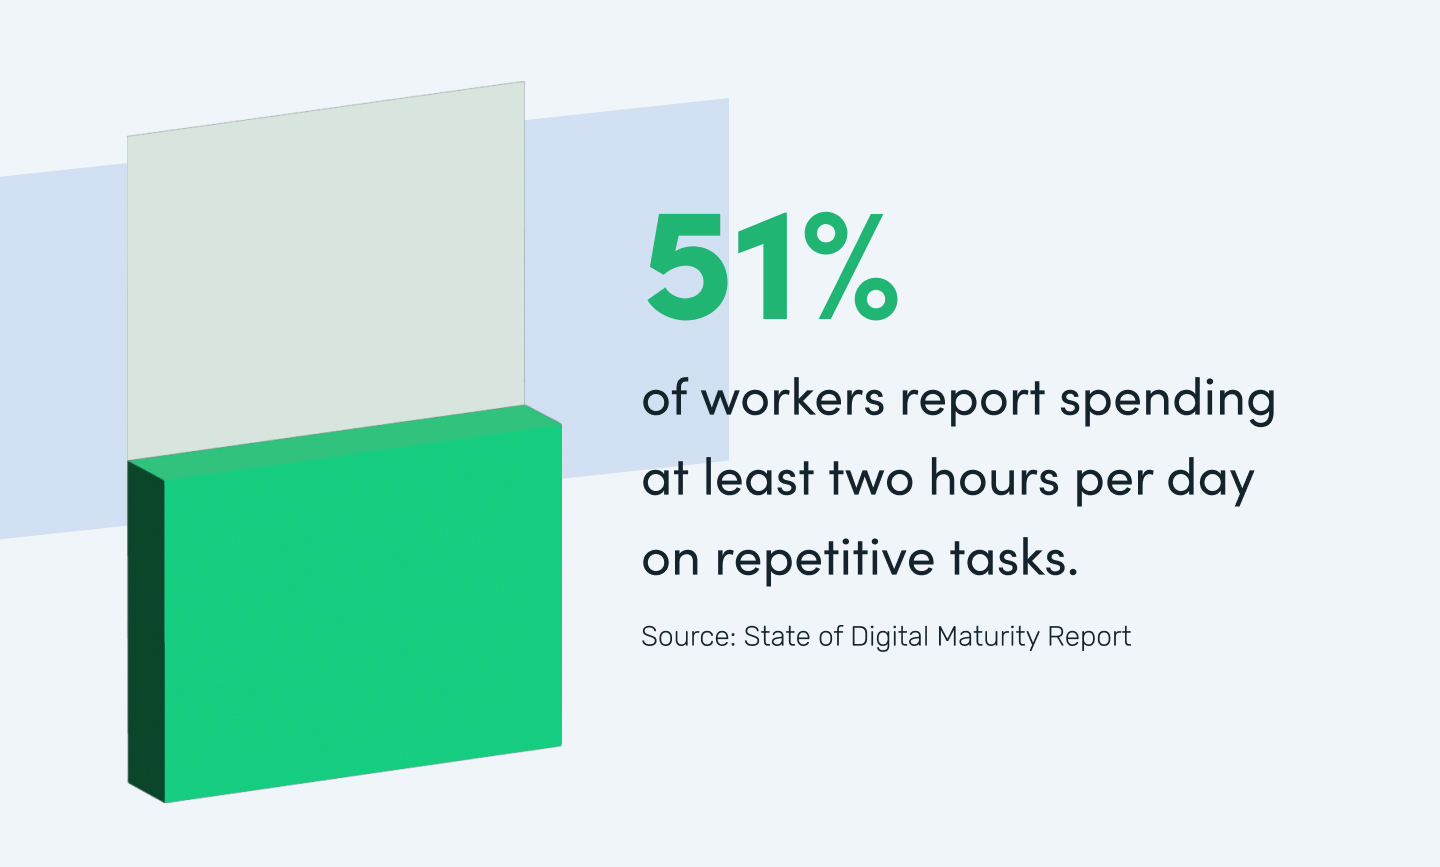 51% of workers report spending at least two hours per day on repetitive tasks